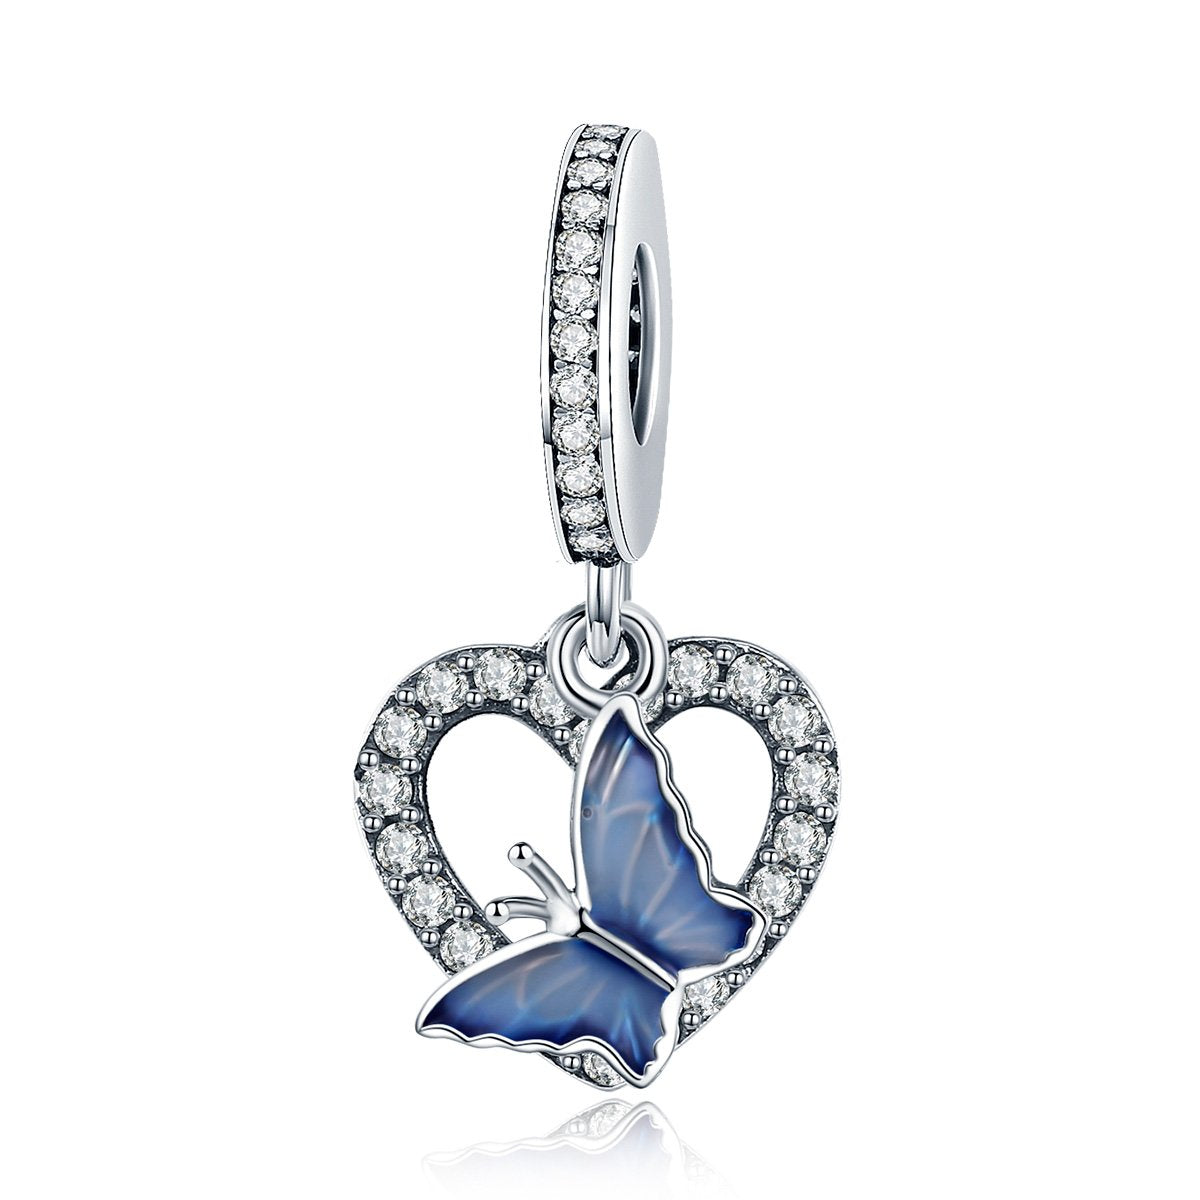 Sterling 925 silver charm the blue butterfly pendant fits Pandora charm and European charm bracelet Xaxe.com